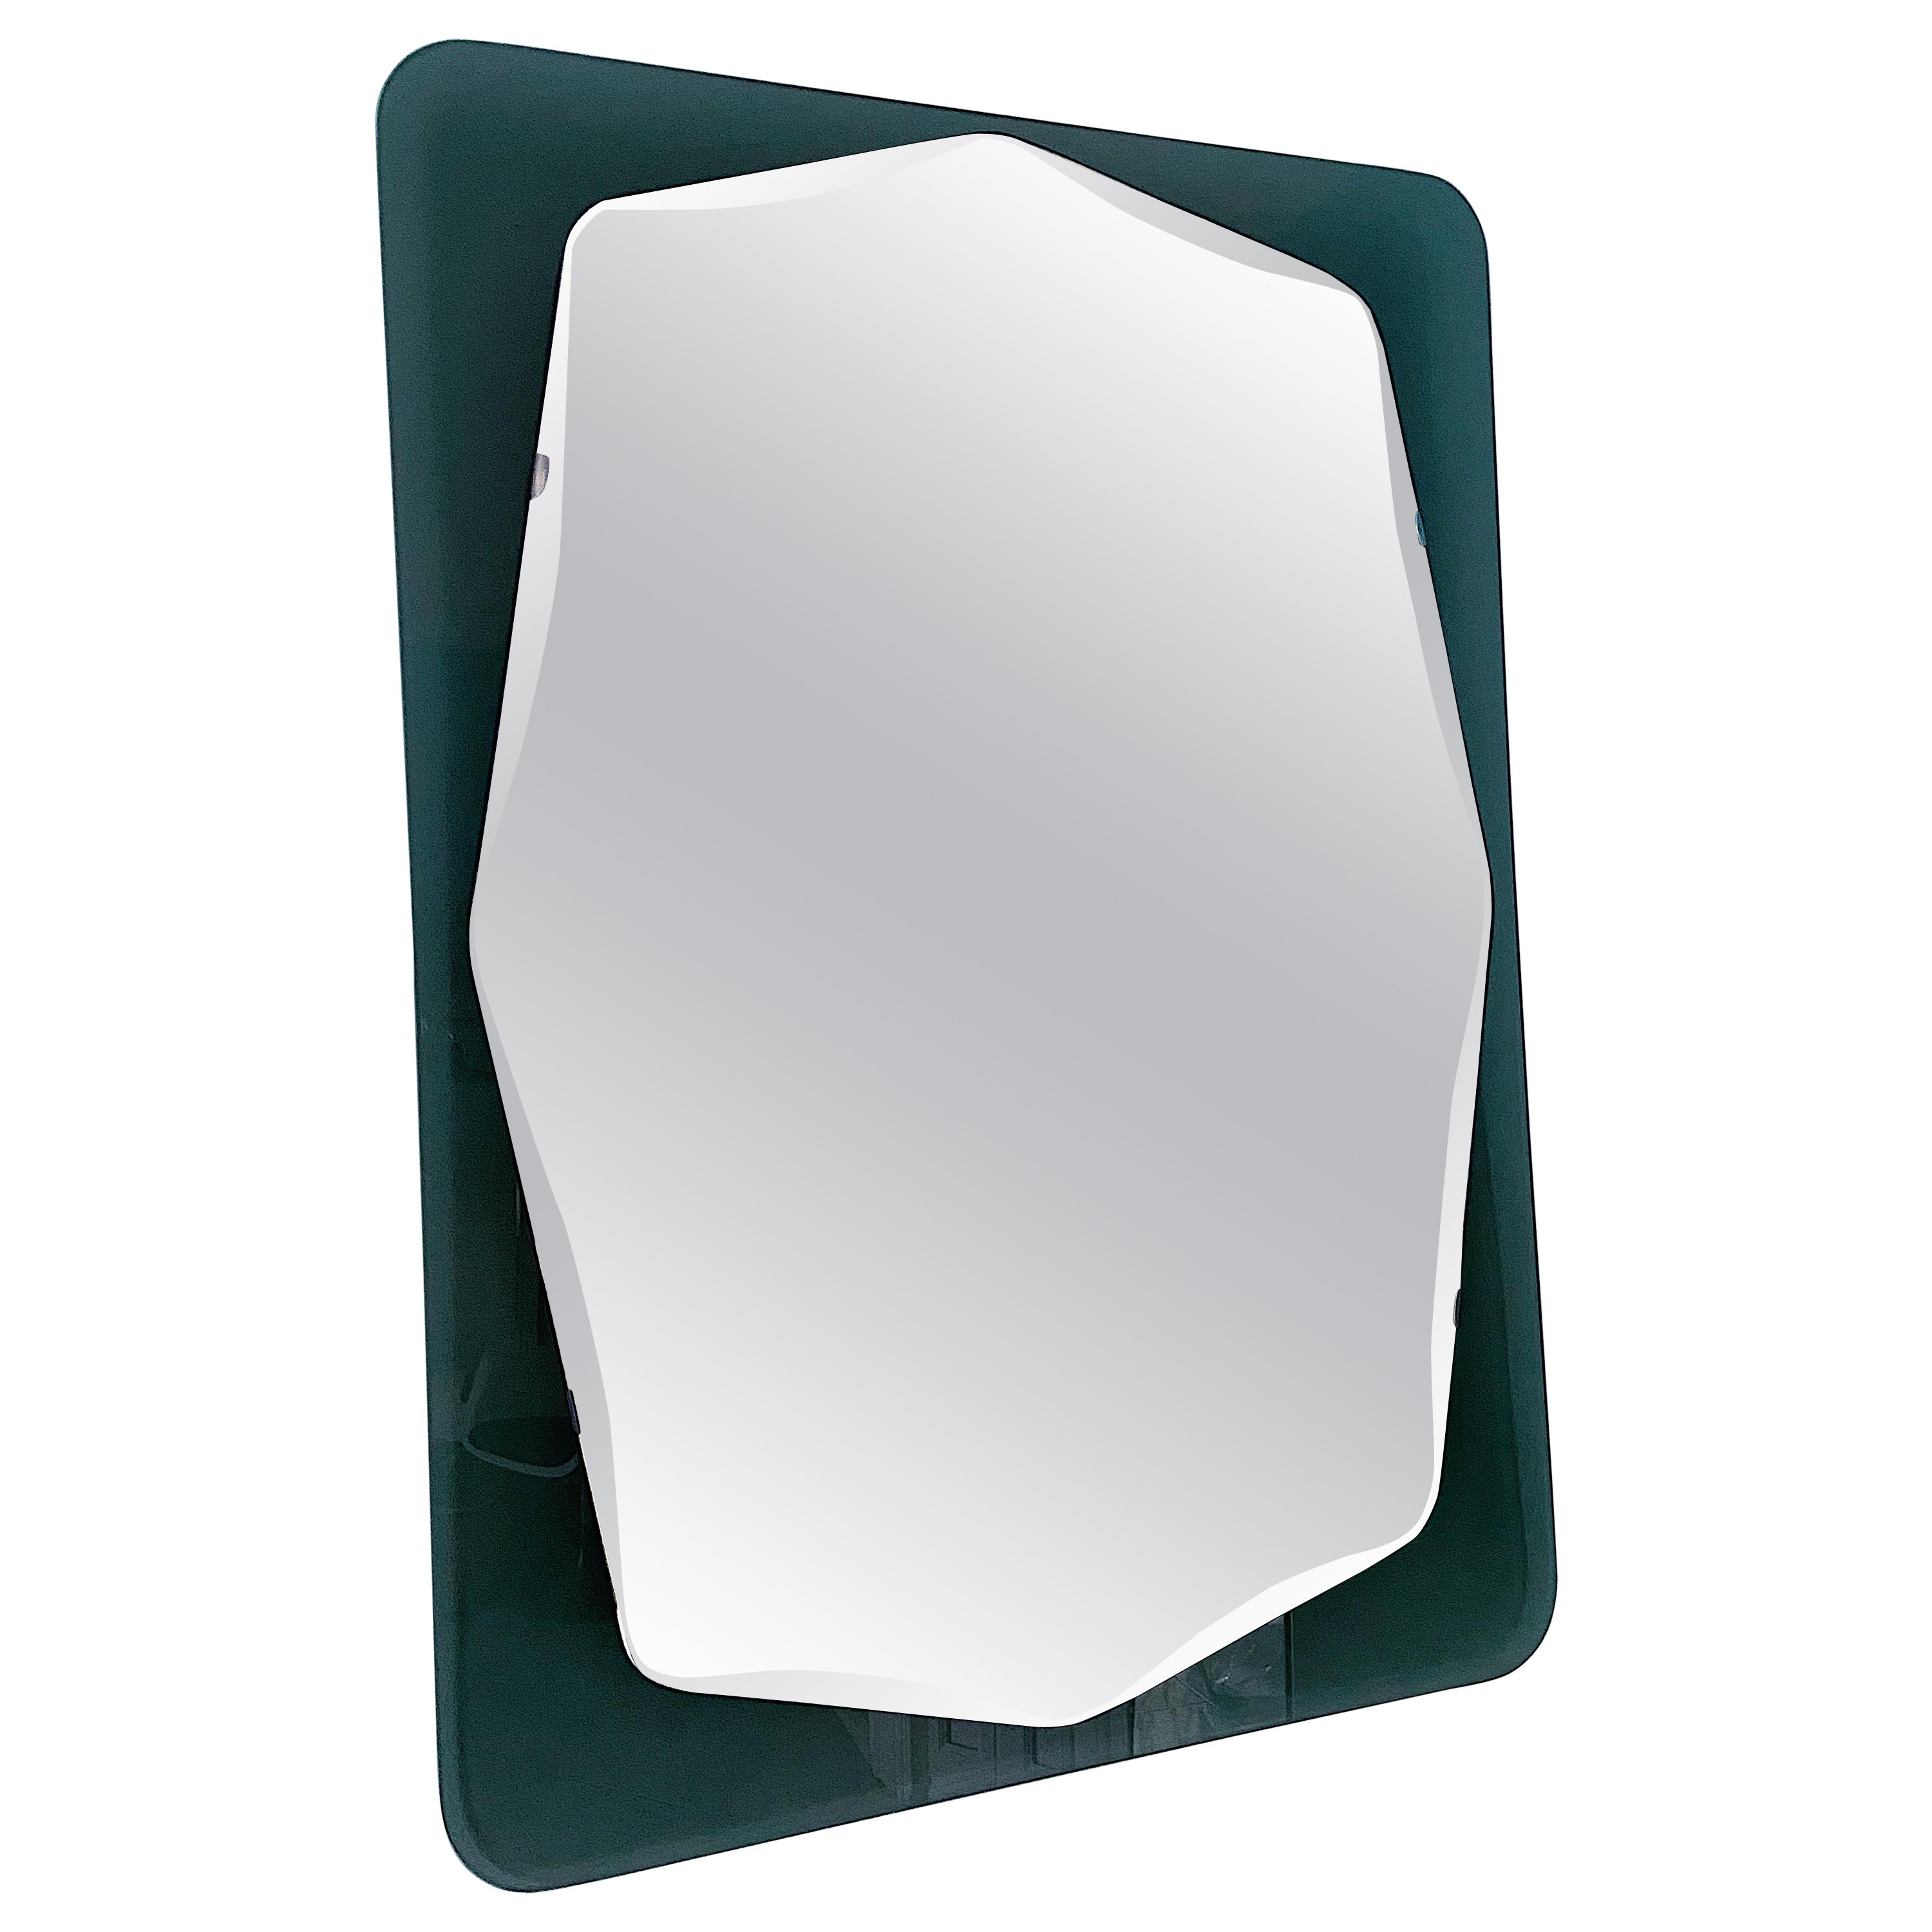 Mid-Century Modern Cristal Art Wall Mirror, 1970s, Italy For Sale